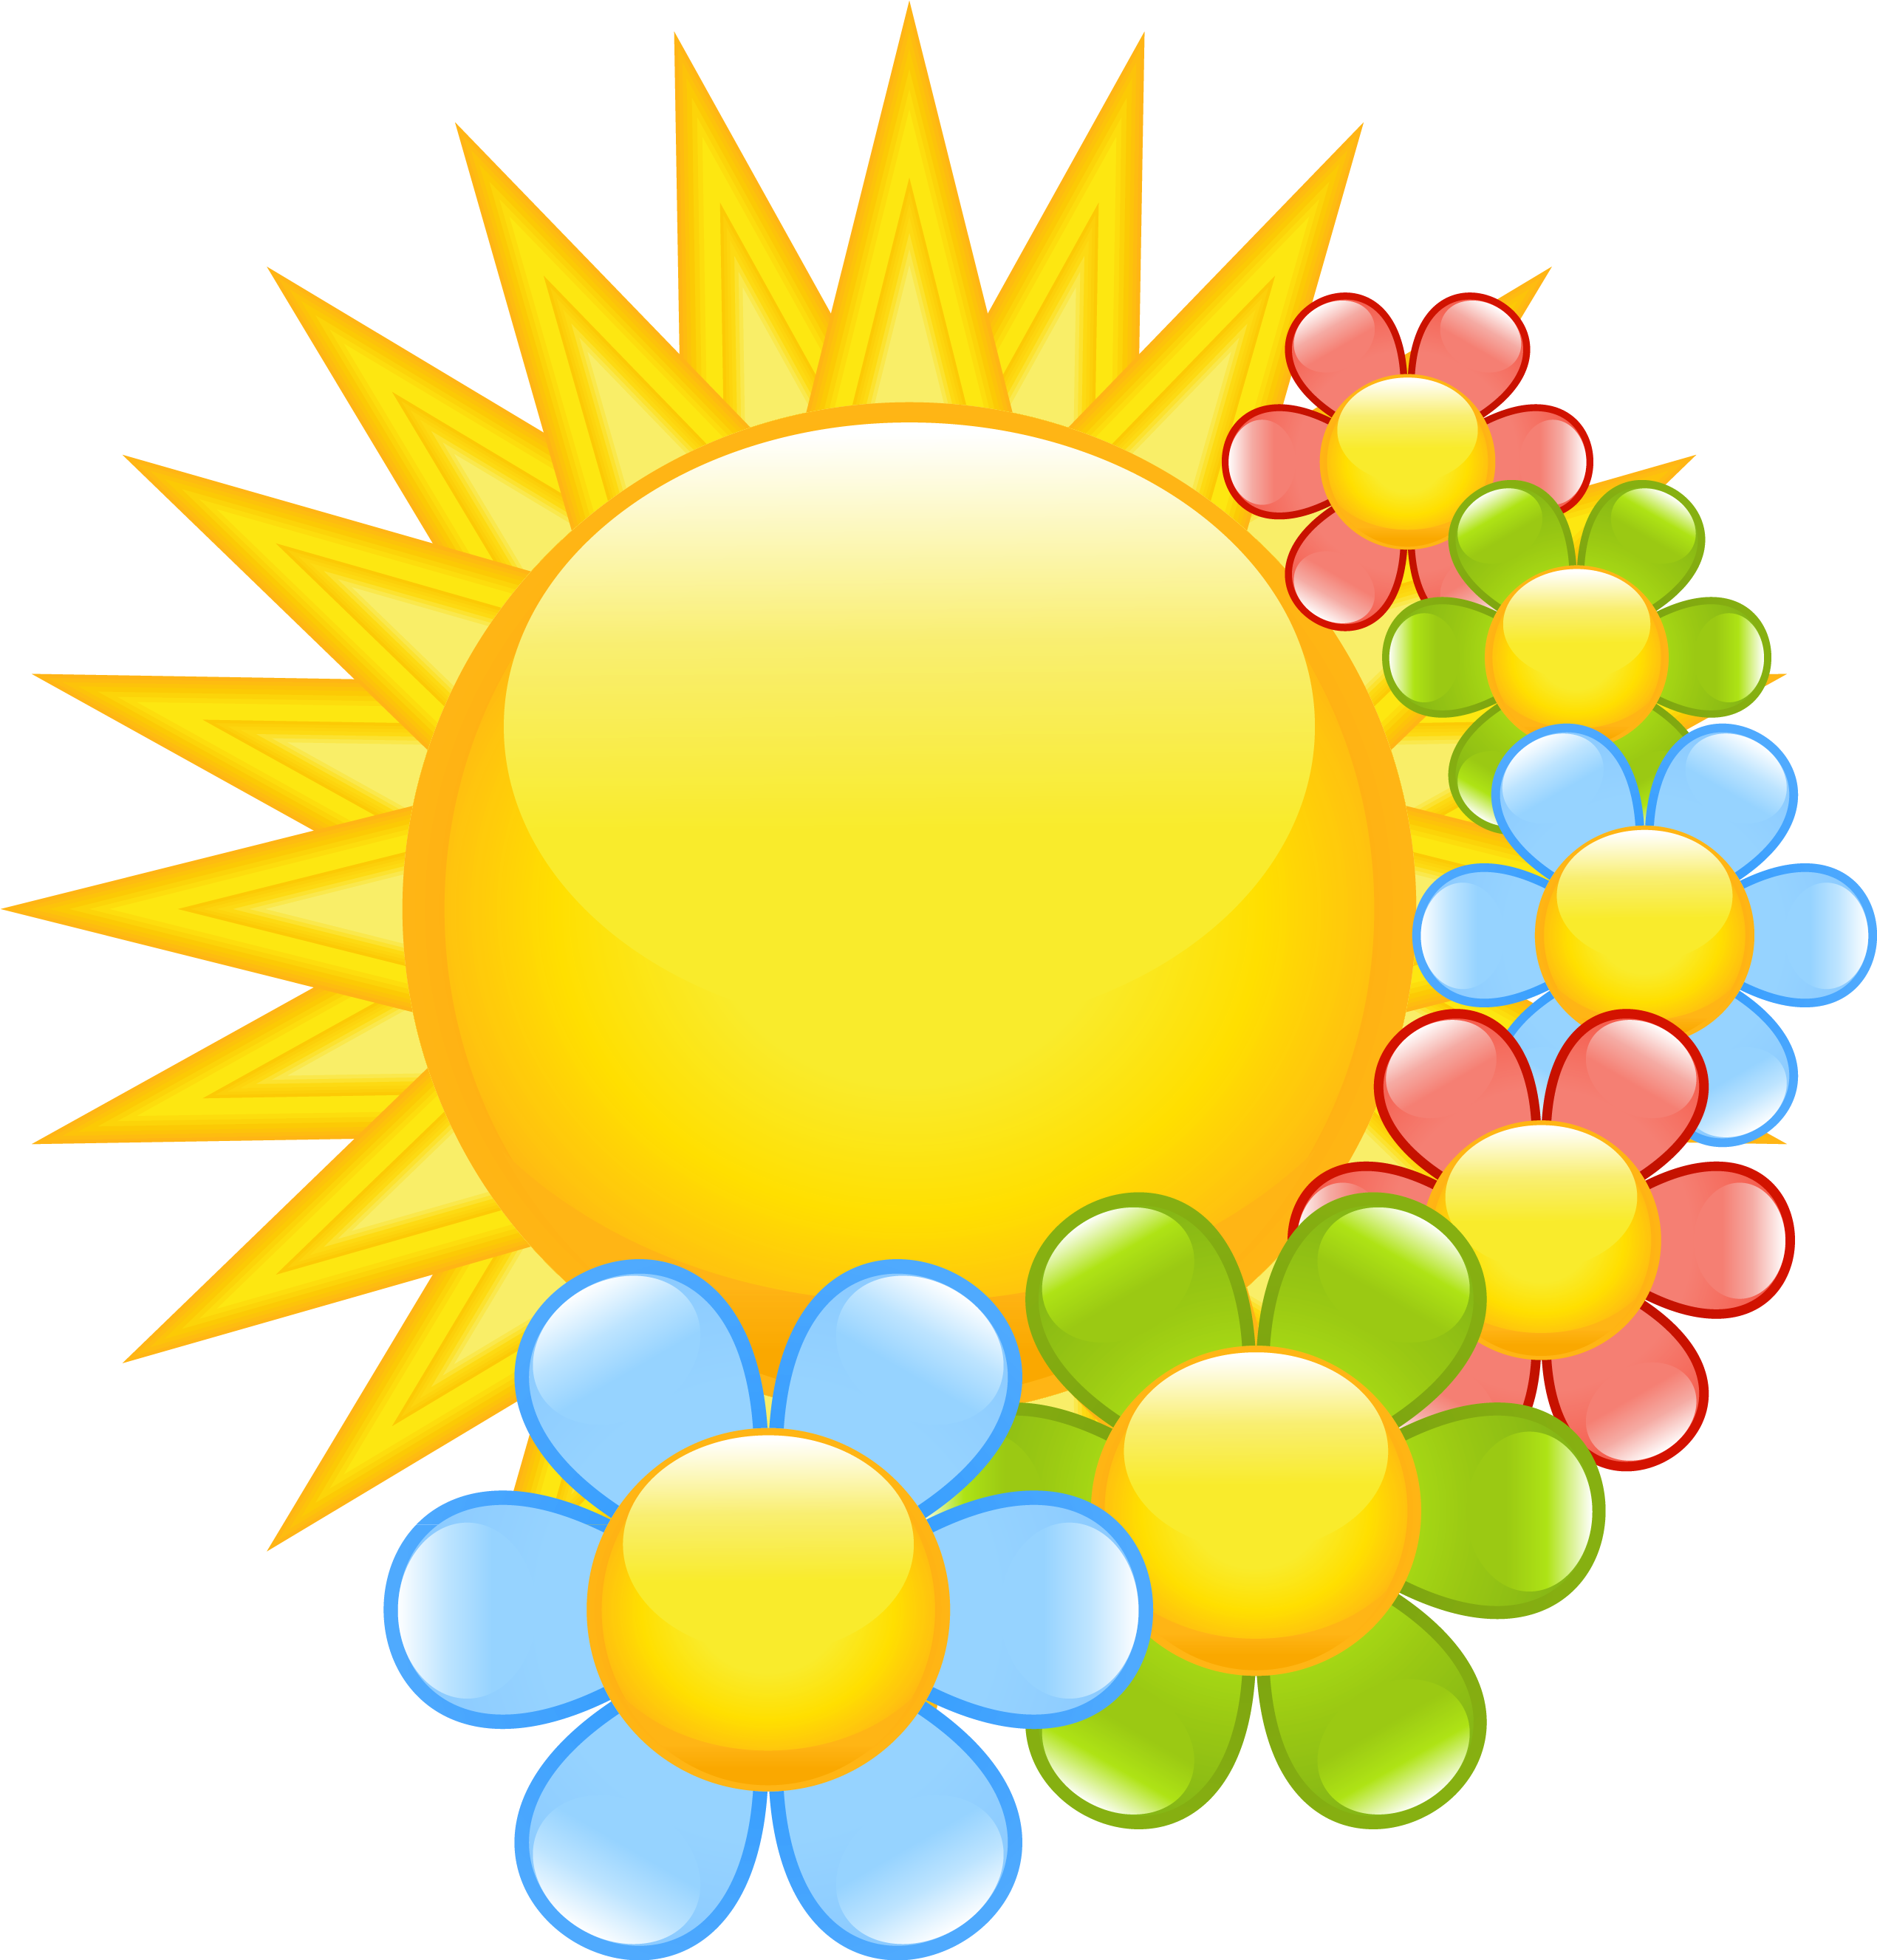 All Images From Collection - Sun And Clouds Clipart (2624x2769)